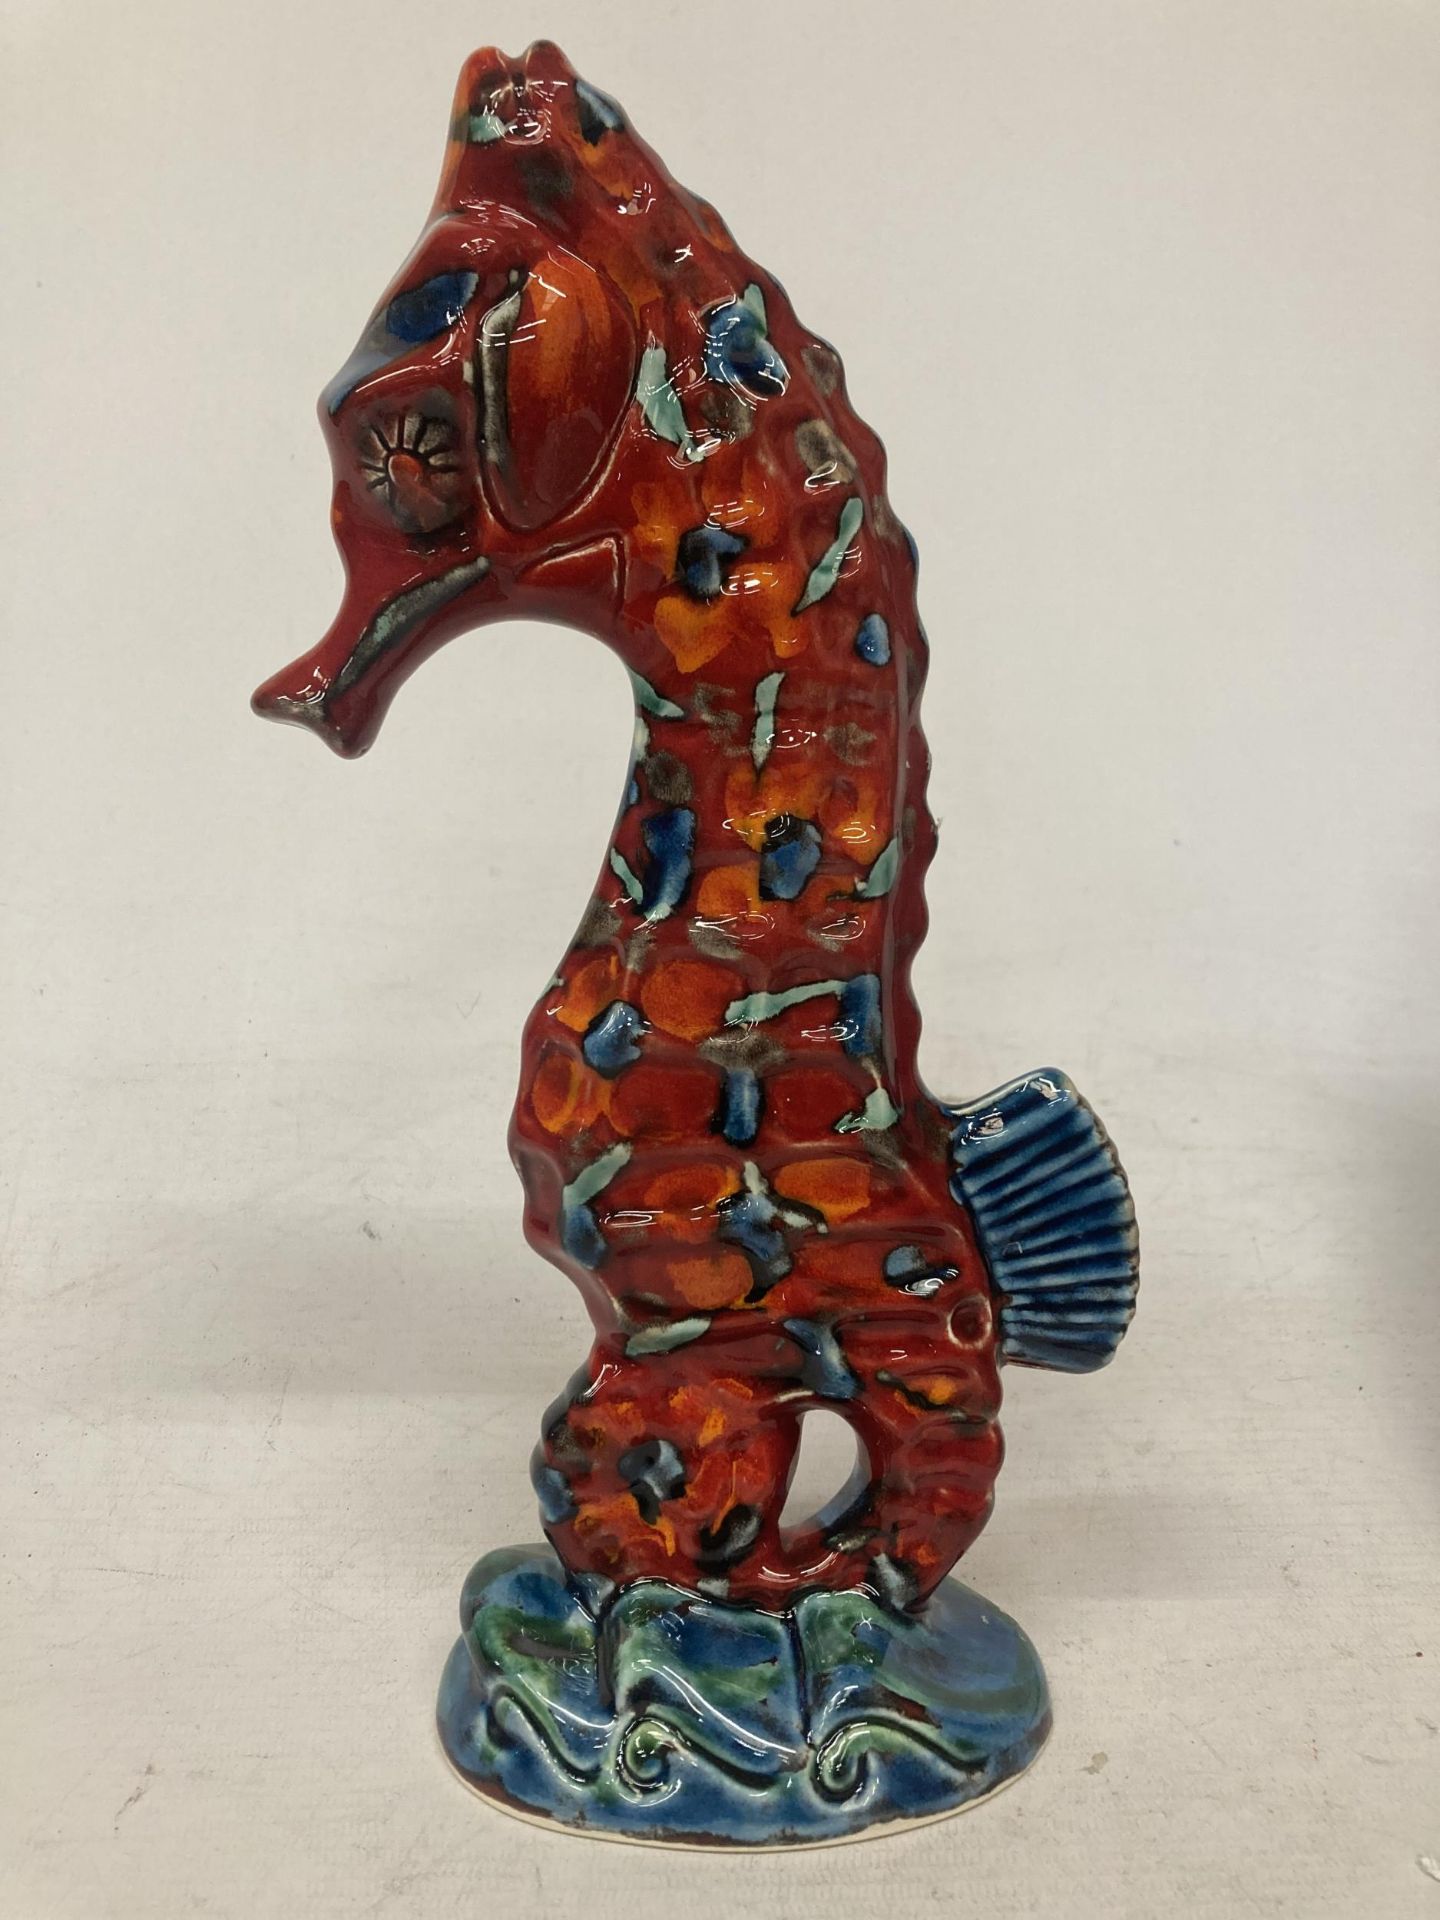 AN ANITA HARRIS HAND PAINTED AND SIGNED IN GOLD SEA HORSE FIGURE